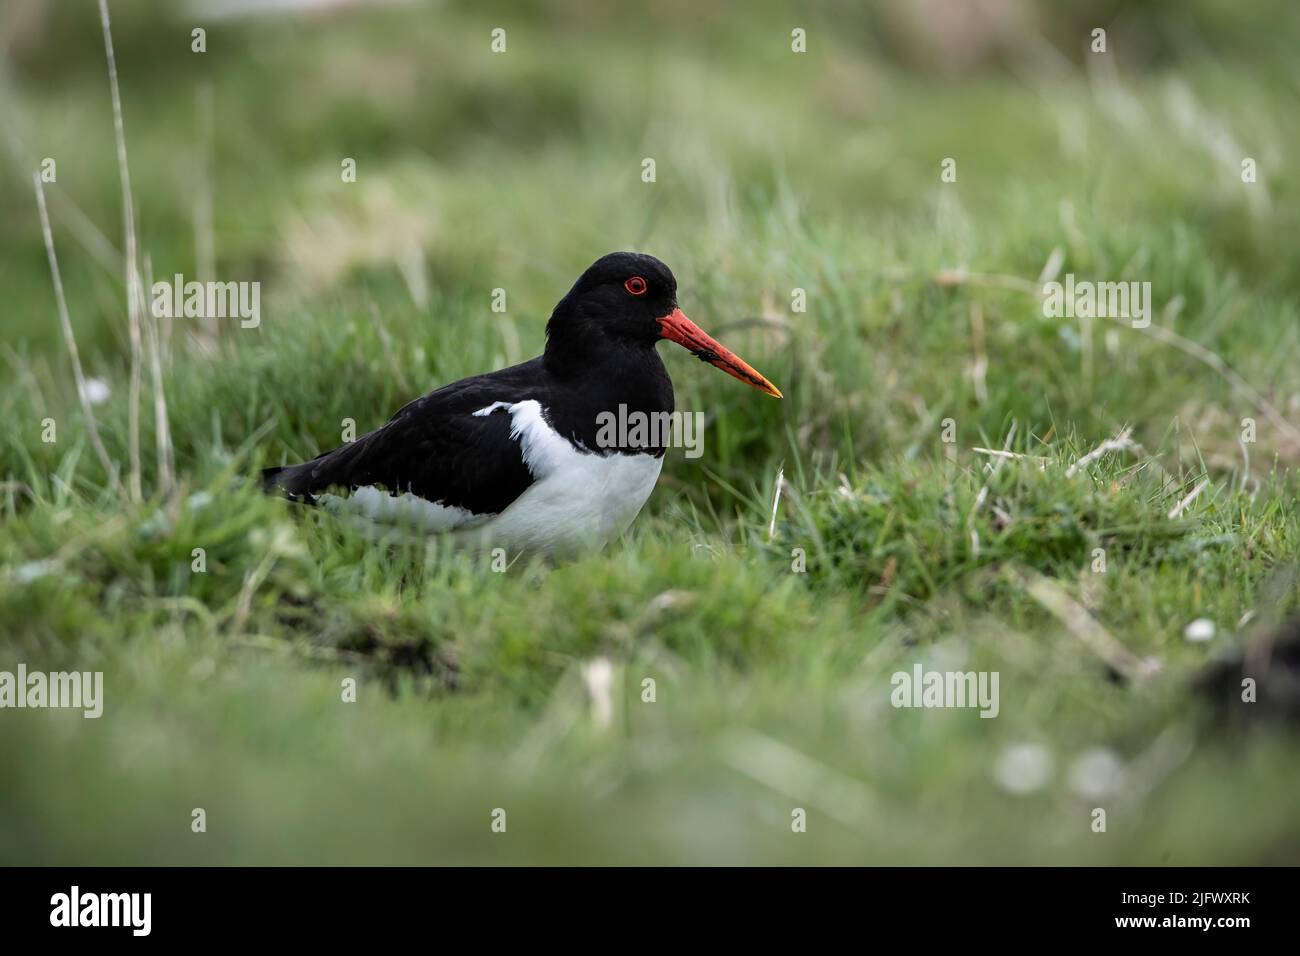 A close up profile of solitary adult Oystercatcher bird (Haematopus ostralegus) laying low in marshy grasslands on the Isle of North Uist, Scotland. Stock Photo